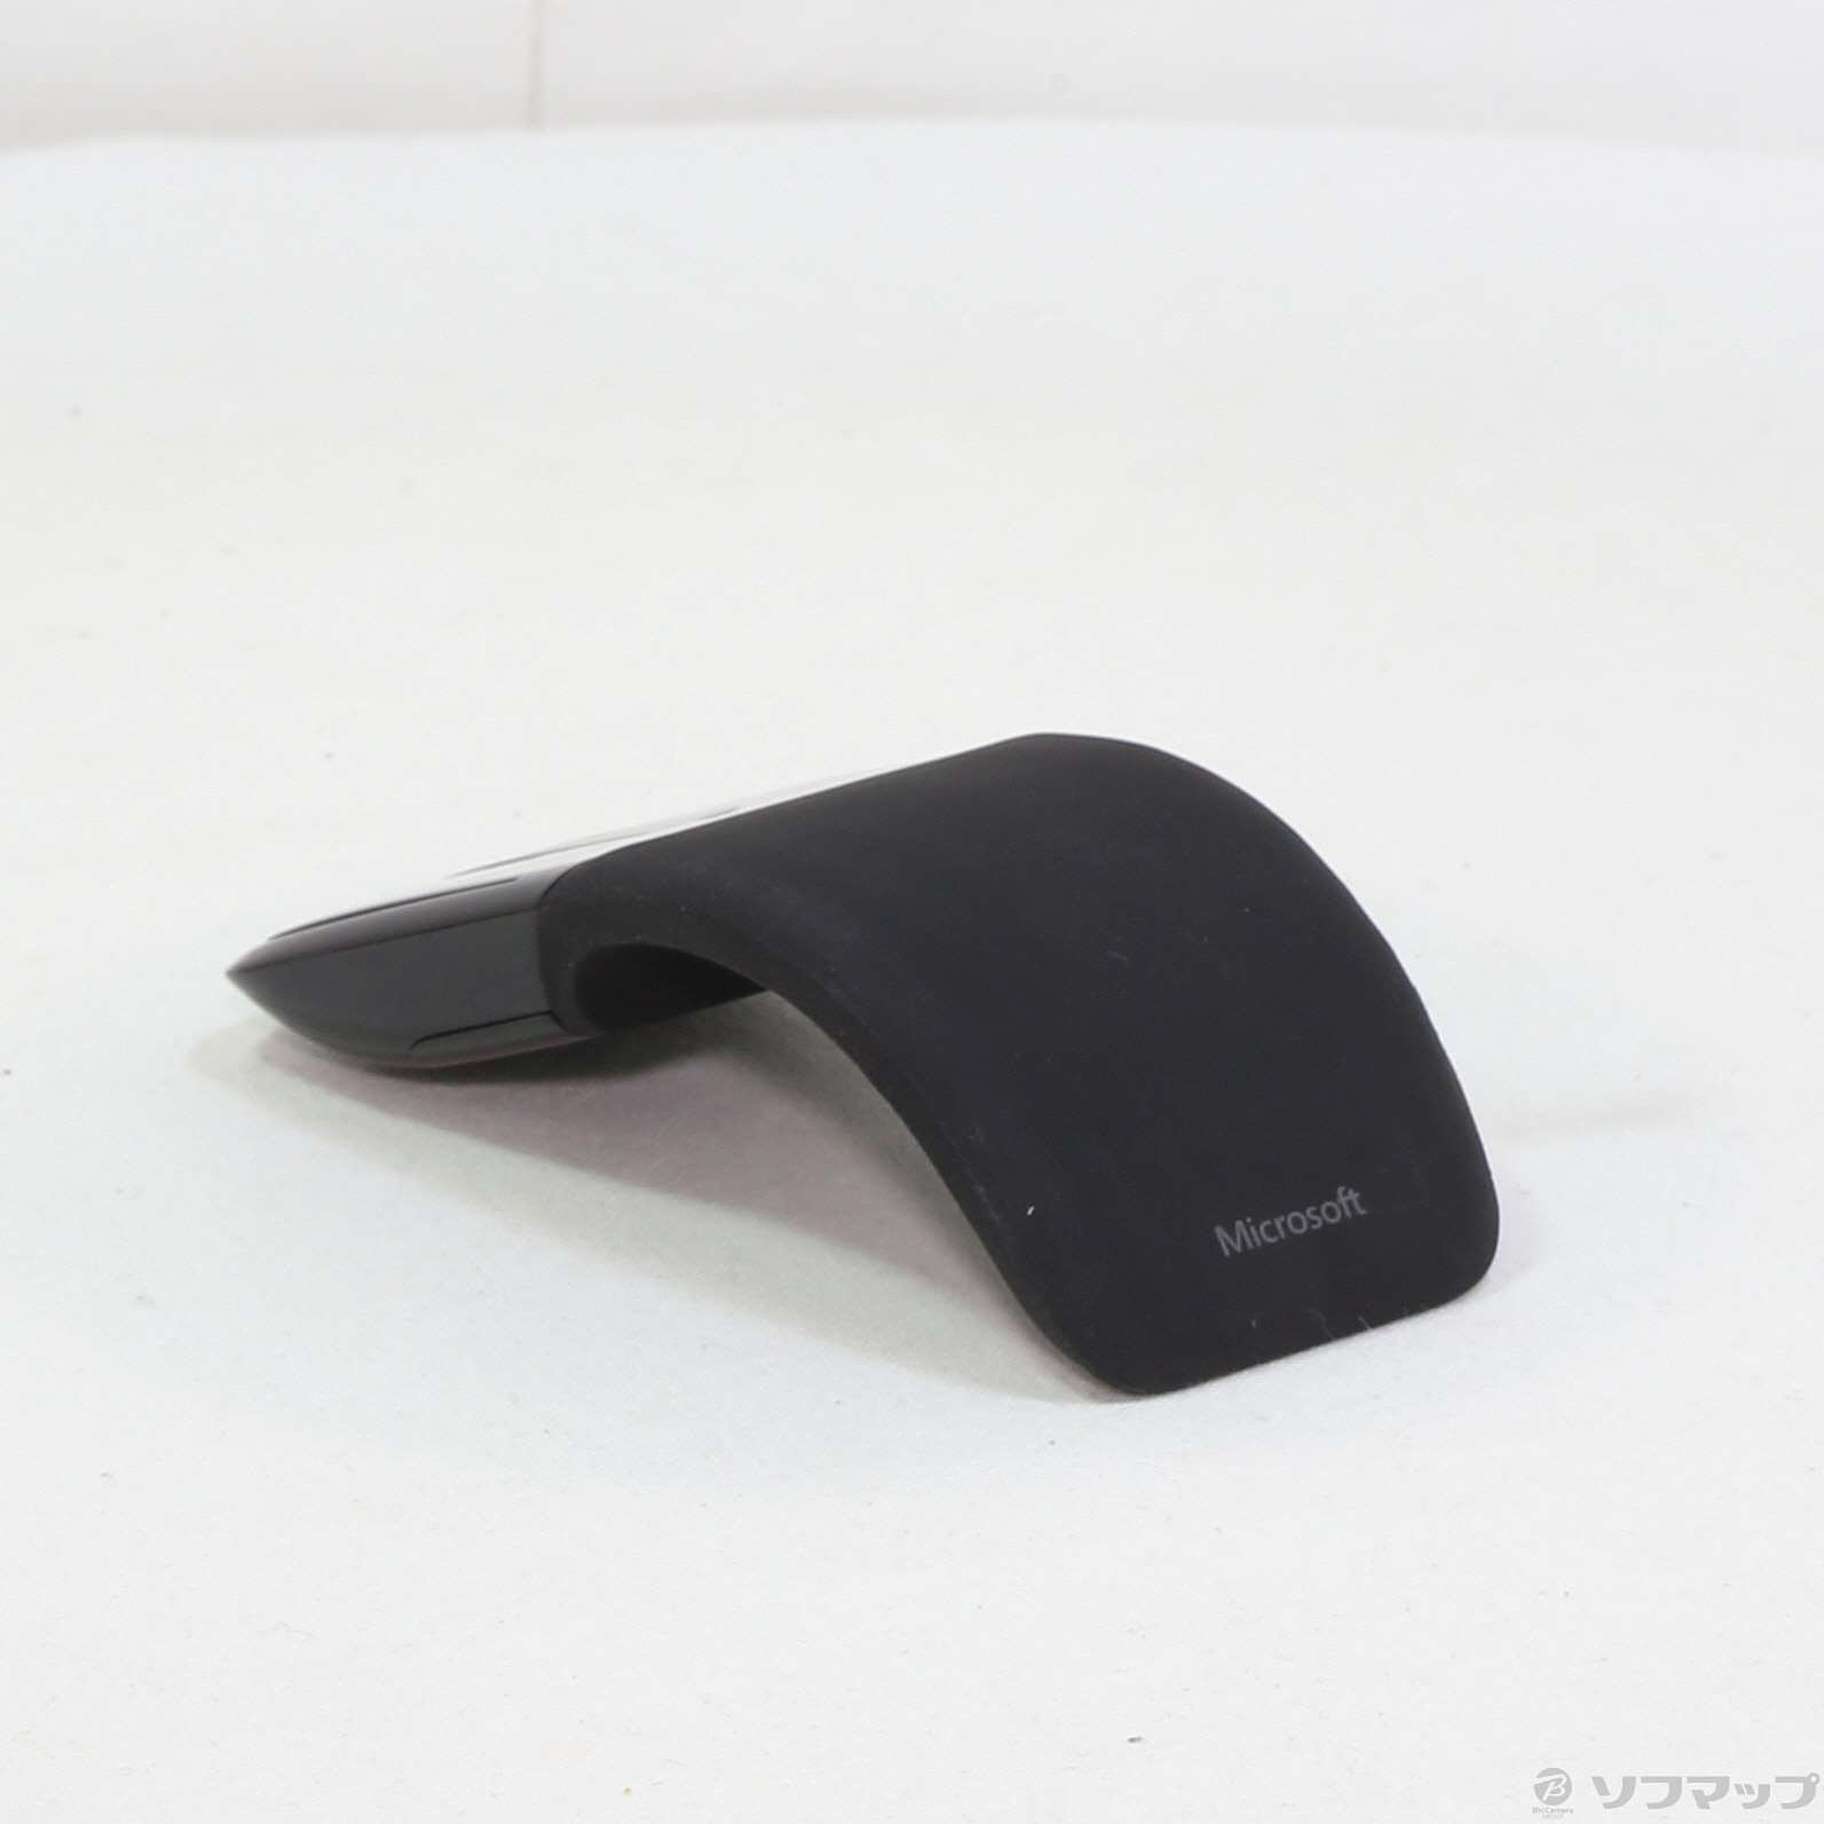 Microsoft ARC TOUCH MOUSE RVF-00062